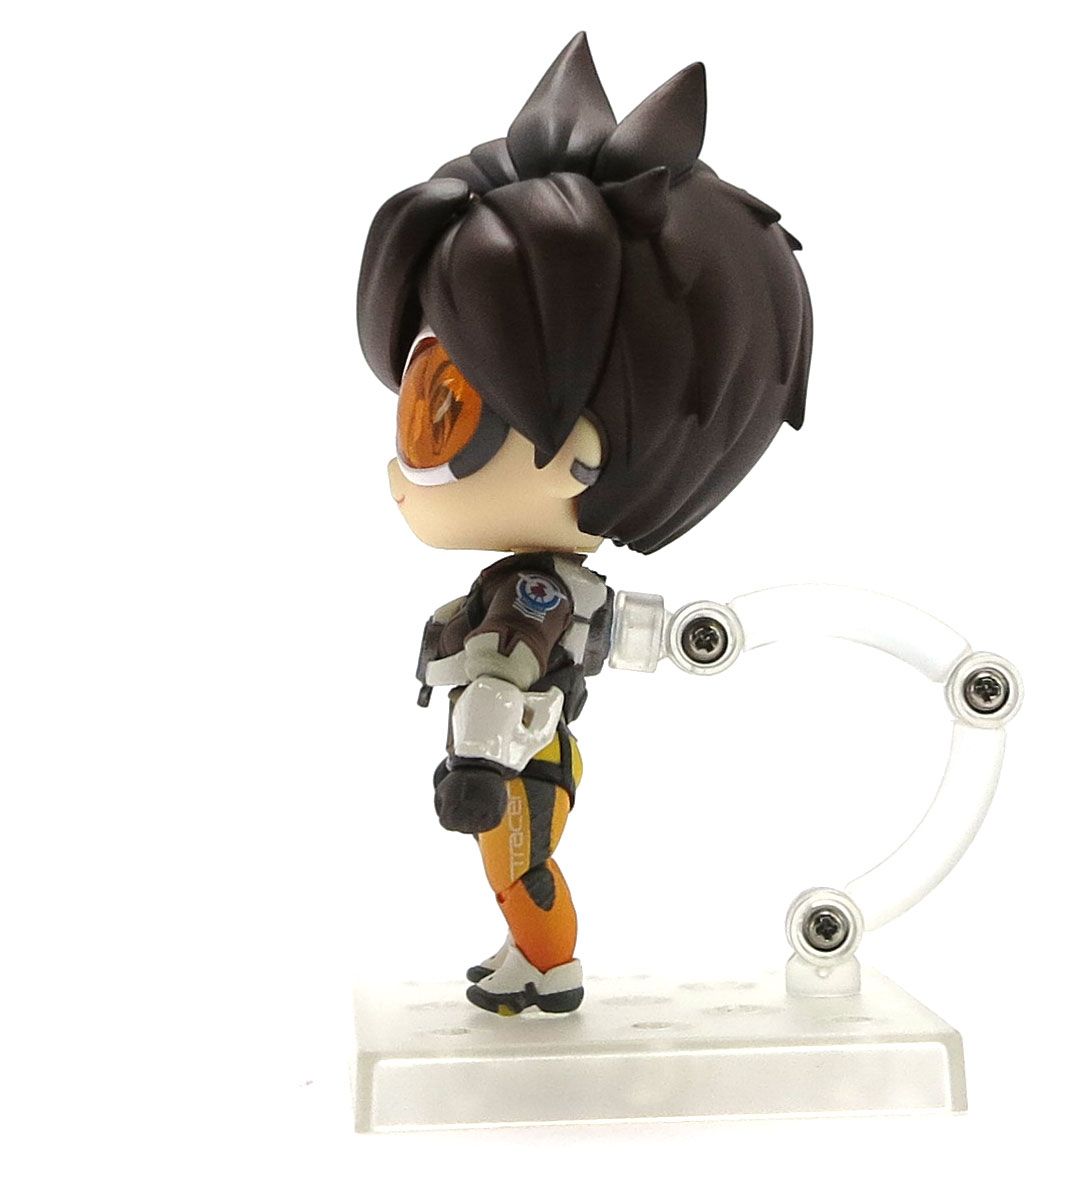 Nendoroid - Tracer Classic Skin Edition (Overwatch)